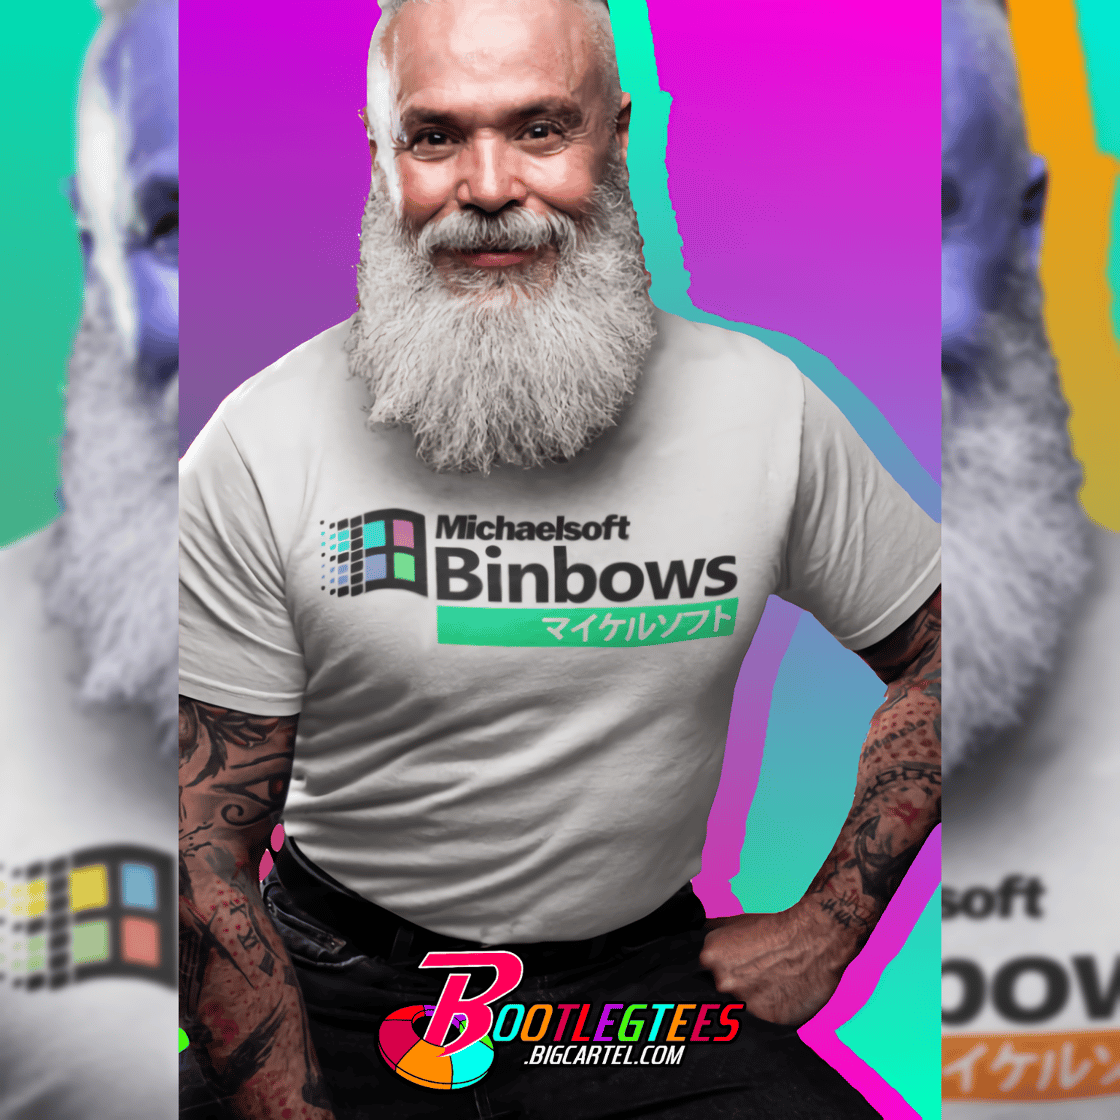 Image of Michaelsoft Binbows